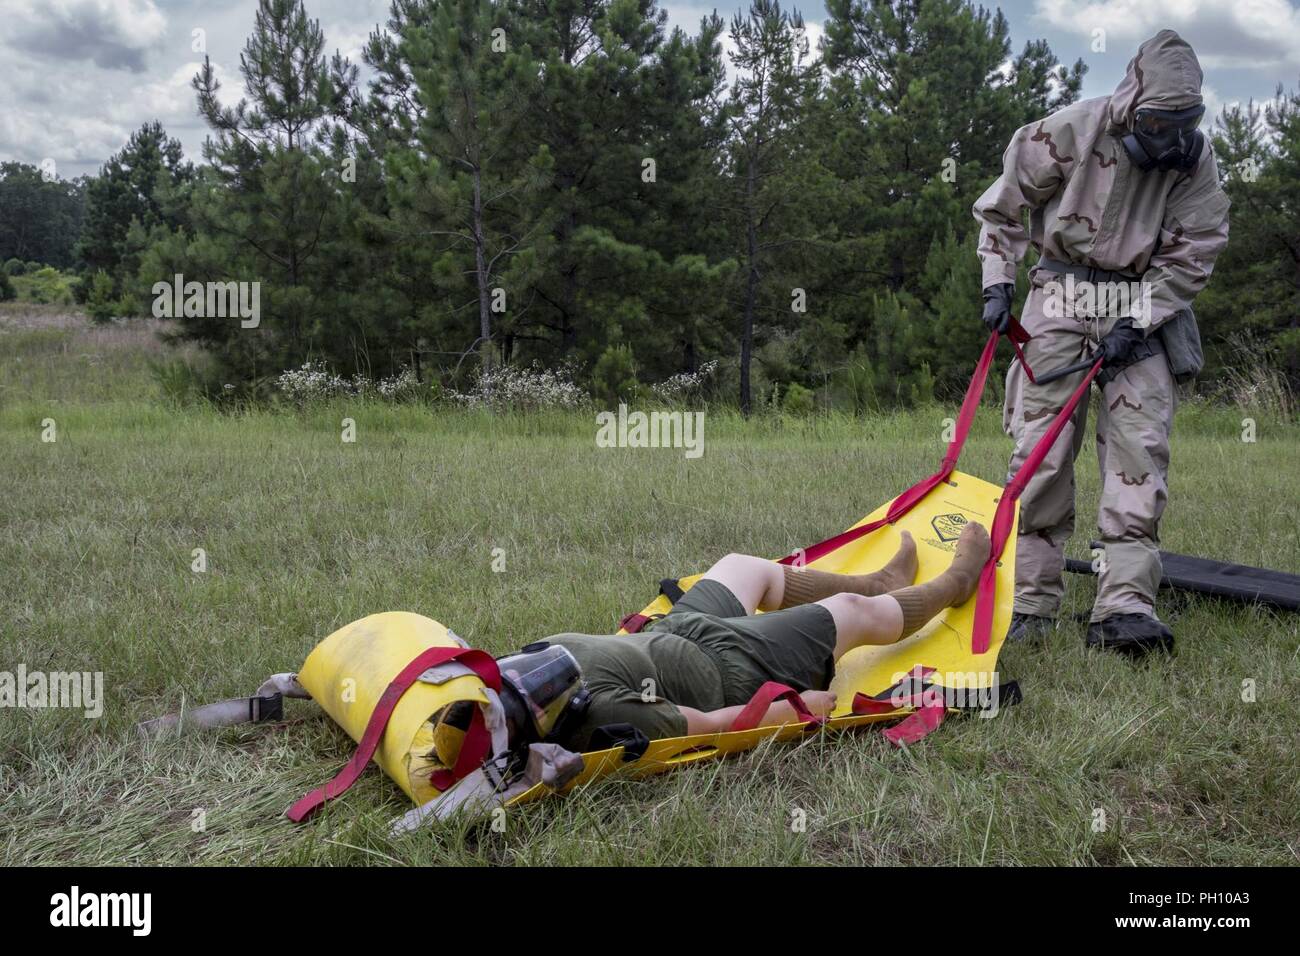 U.S. Marines with Chemical, Biological, Radiological, and Nuclear (CBRN) Platoon, Headquarters Battalion, 1st Marine Division, conduct casualty drills during the Concept of Real World CBRN Operations course at the Guardian Centers in Perry, Georgia, June 21, 2018. This training was conducted to enhance and refine the conduct of sensitive site exploitation, which supports the commander’s decision making cycle and maintains momentum during combat operations. Stock Photo